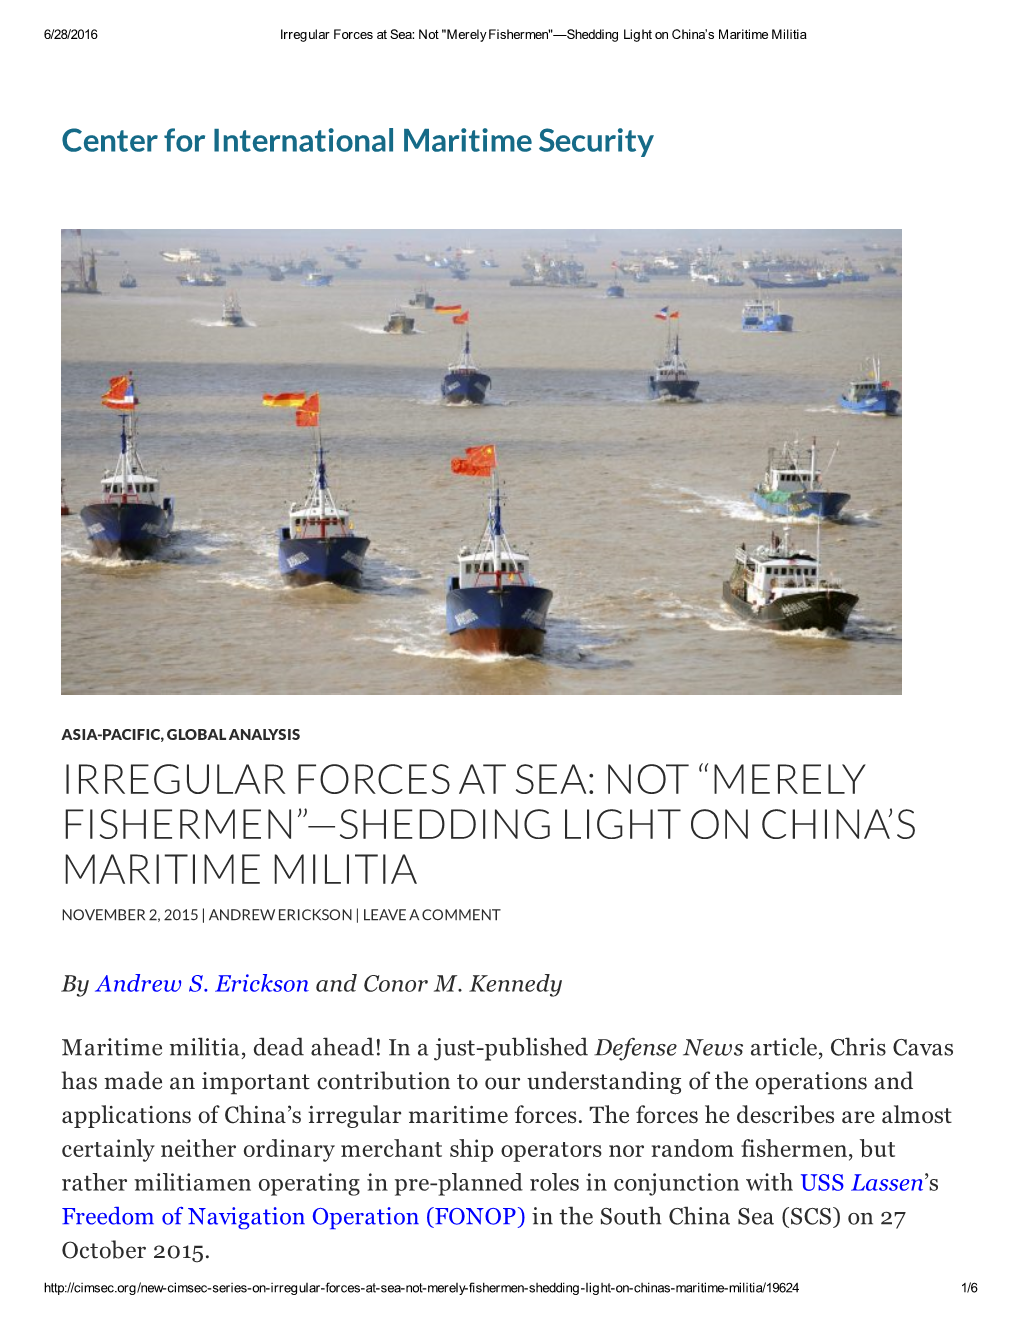 Irregular Forces at Sea: 'Not Merely Fishermen